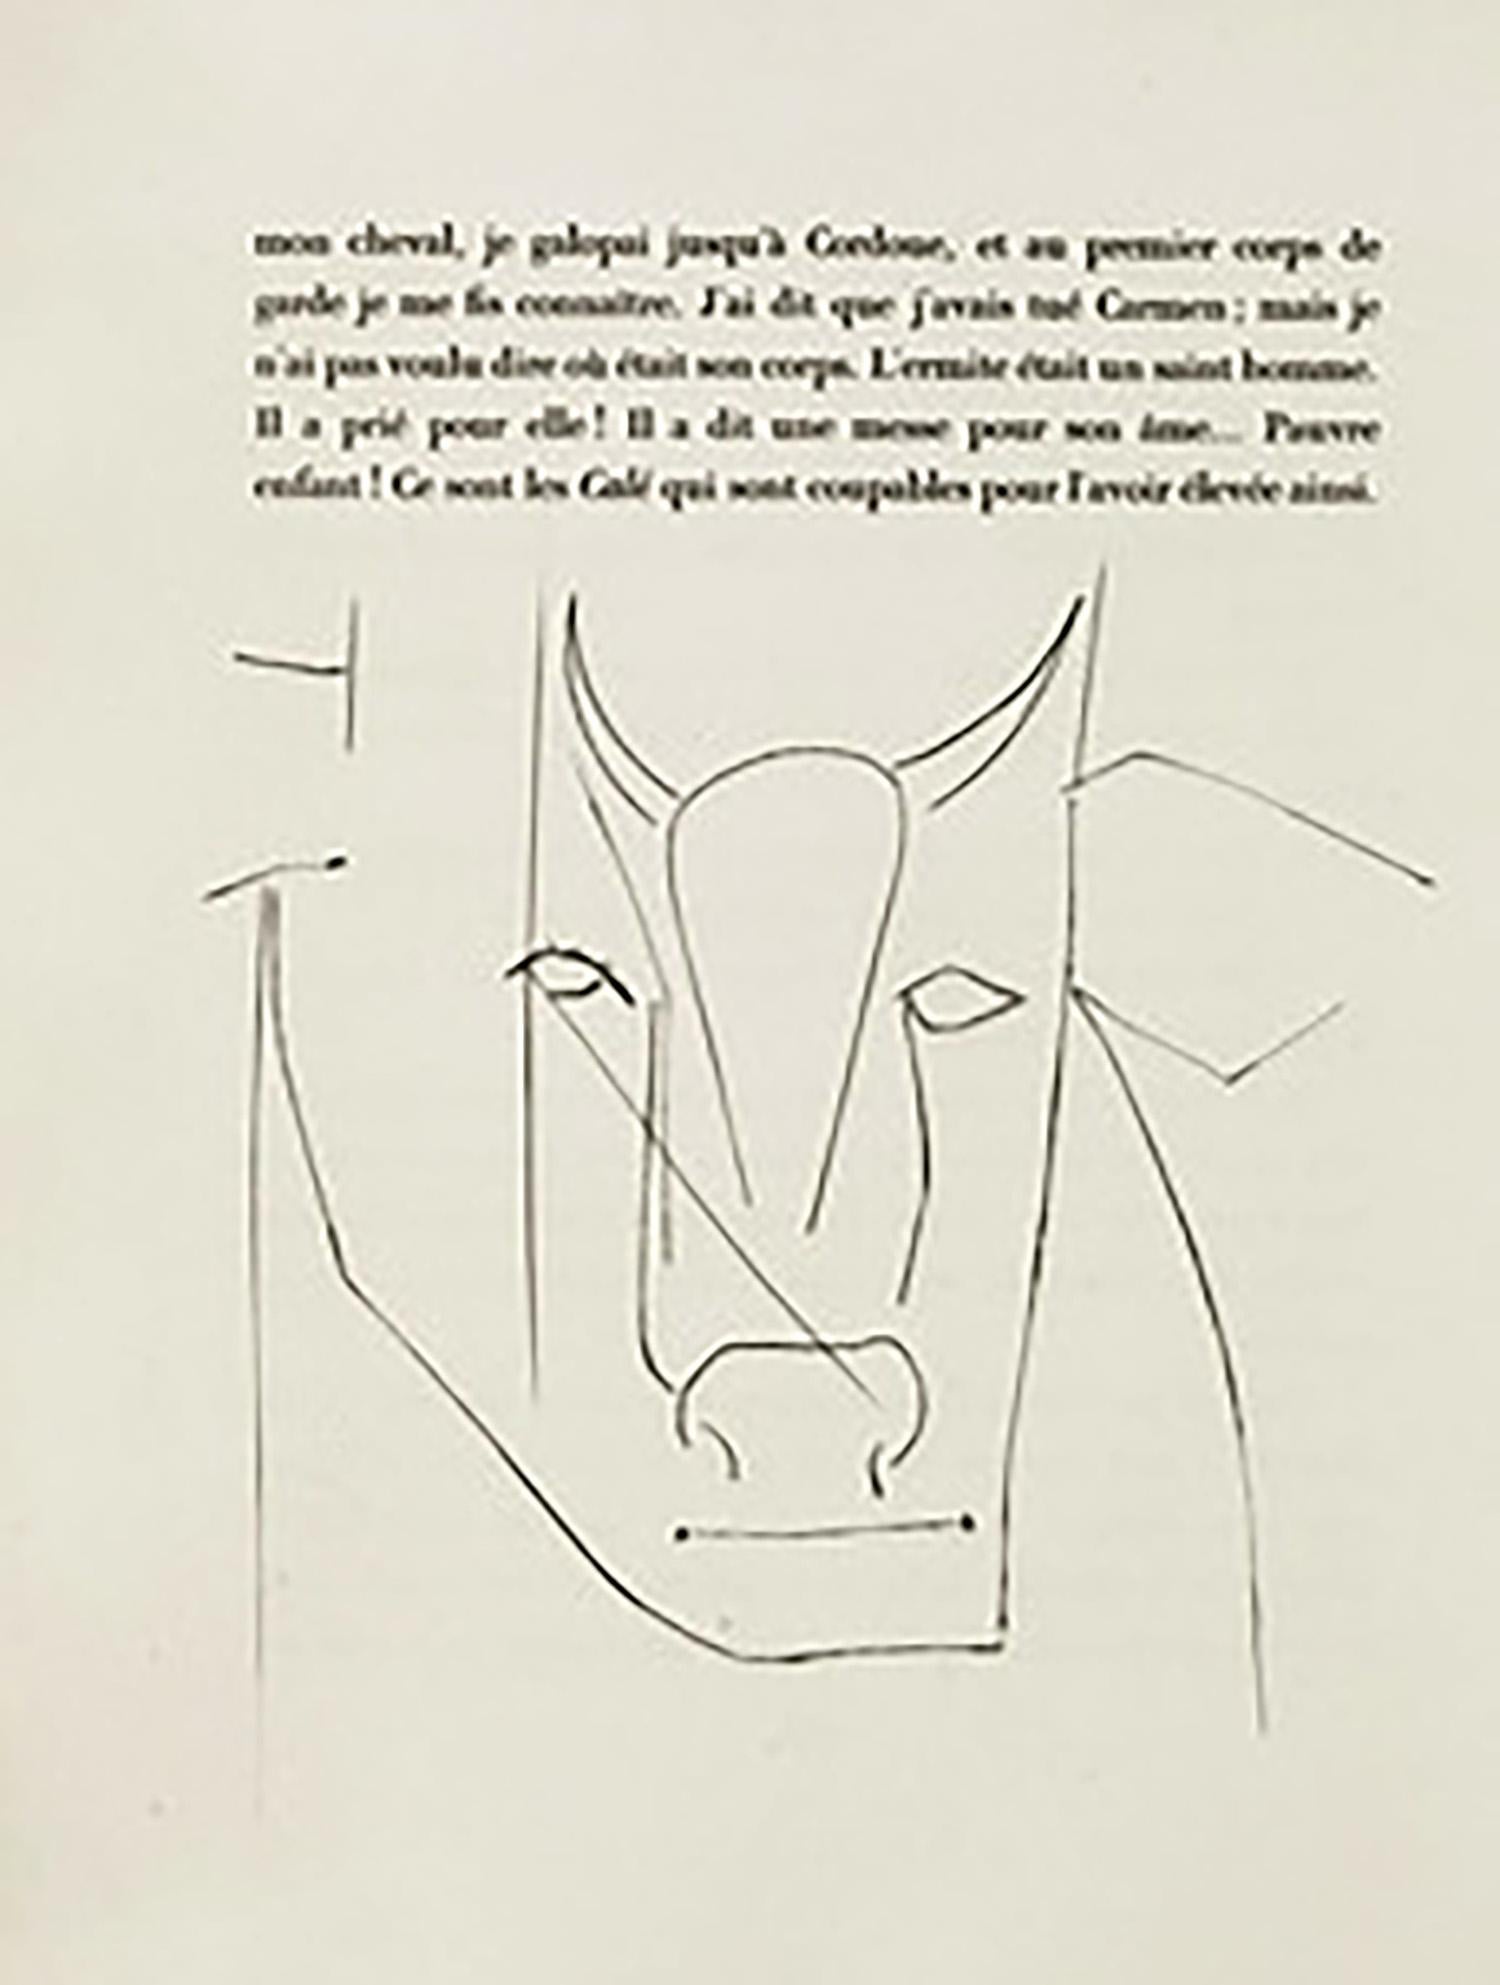 Pablo Picasso Animal Print - Head of a Bull (Plate XXXII), from Carmen